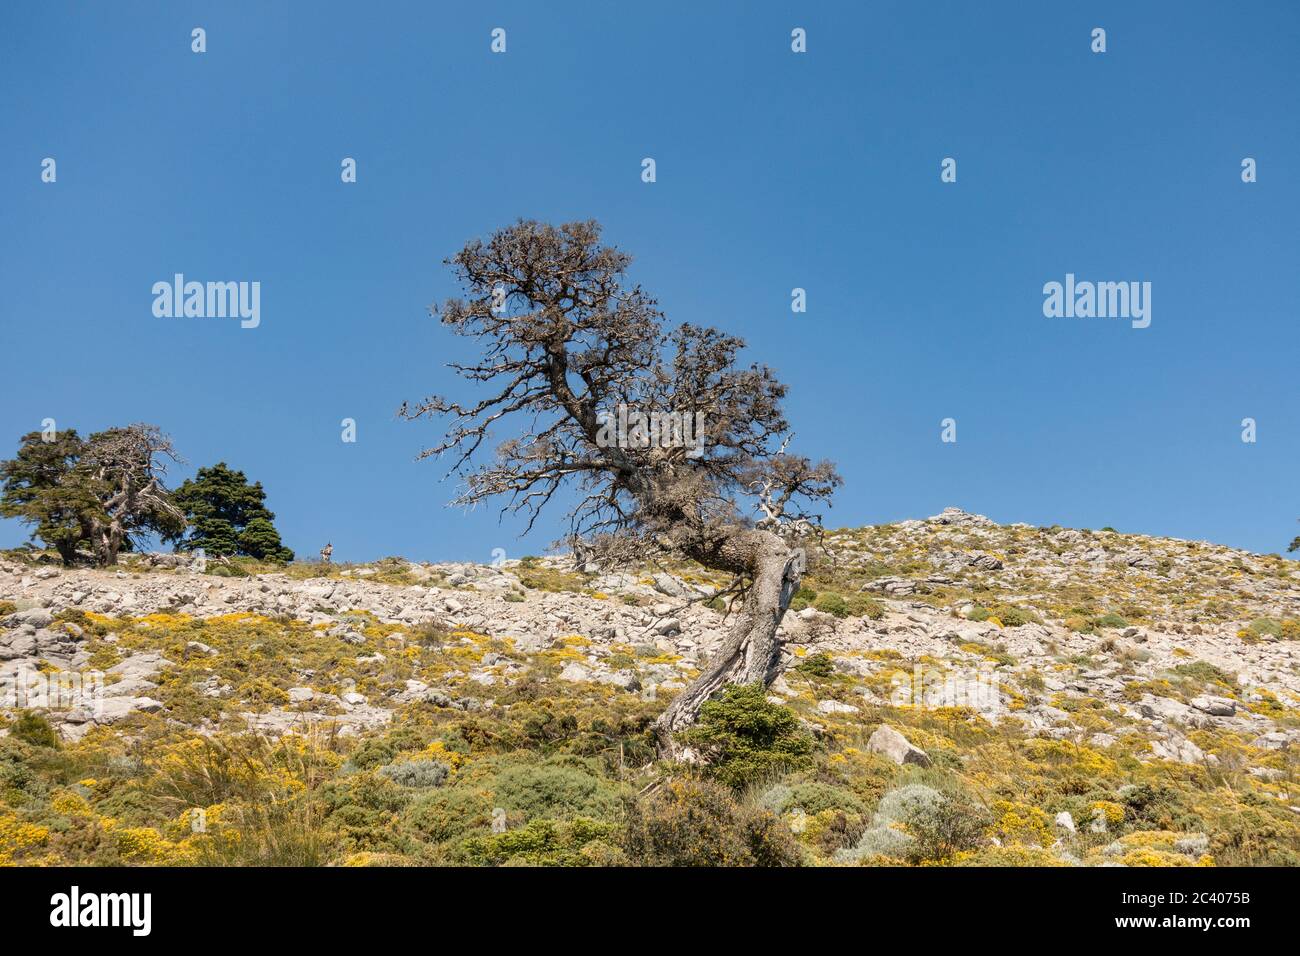 Dead tree Spanish fir (Abies Pinsapo) in Biosphere Reserve. Natural Park Sierra de las Nieves, Malaga province. Andalusia, Southern Spain. Europe. Stock Photo